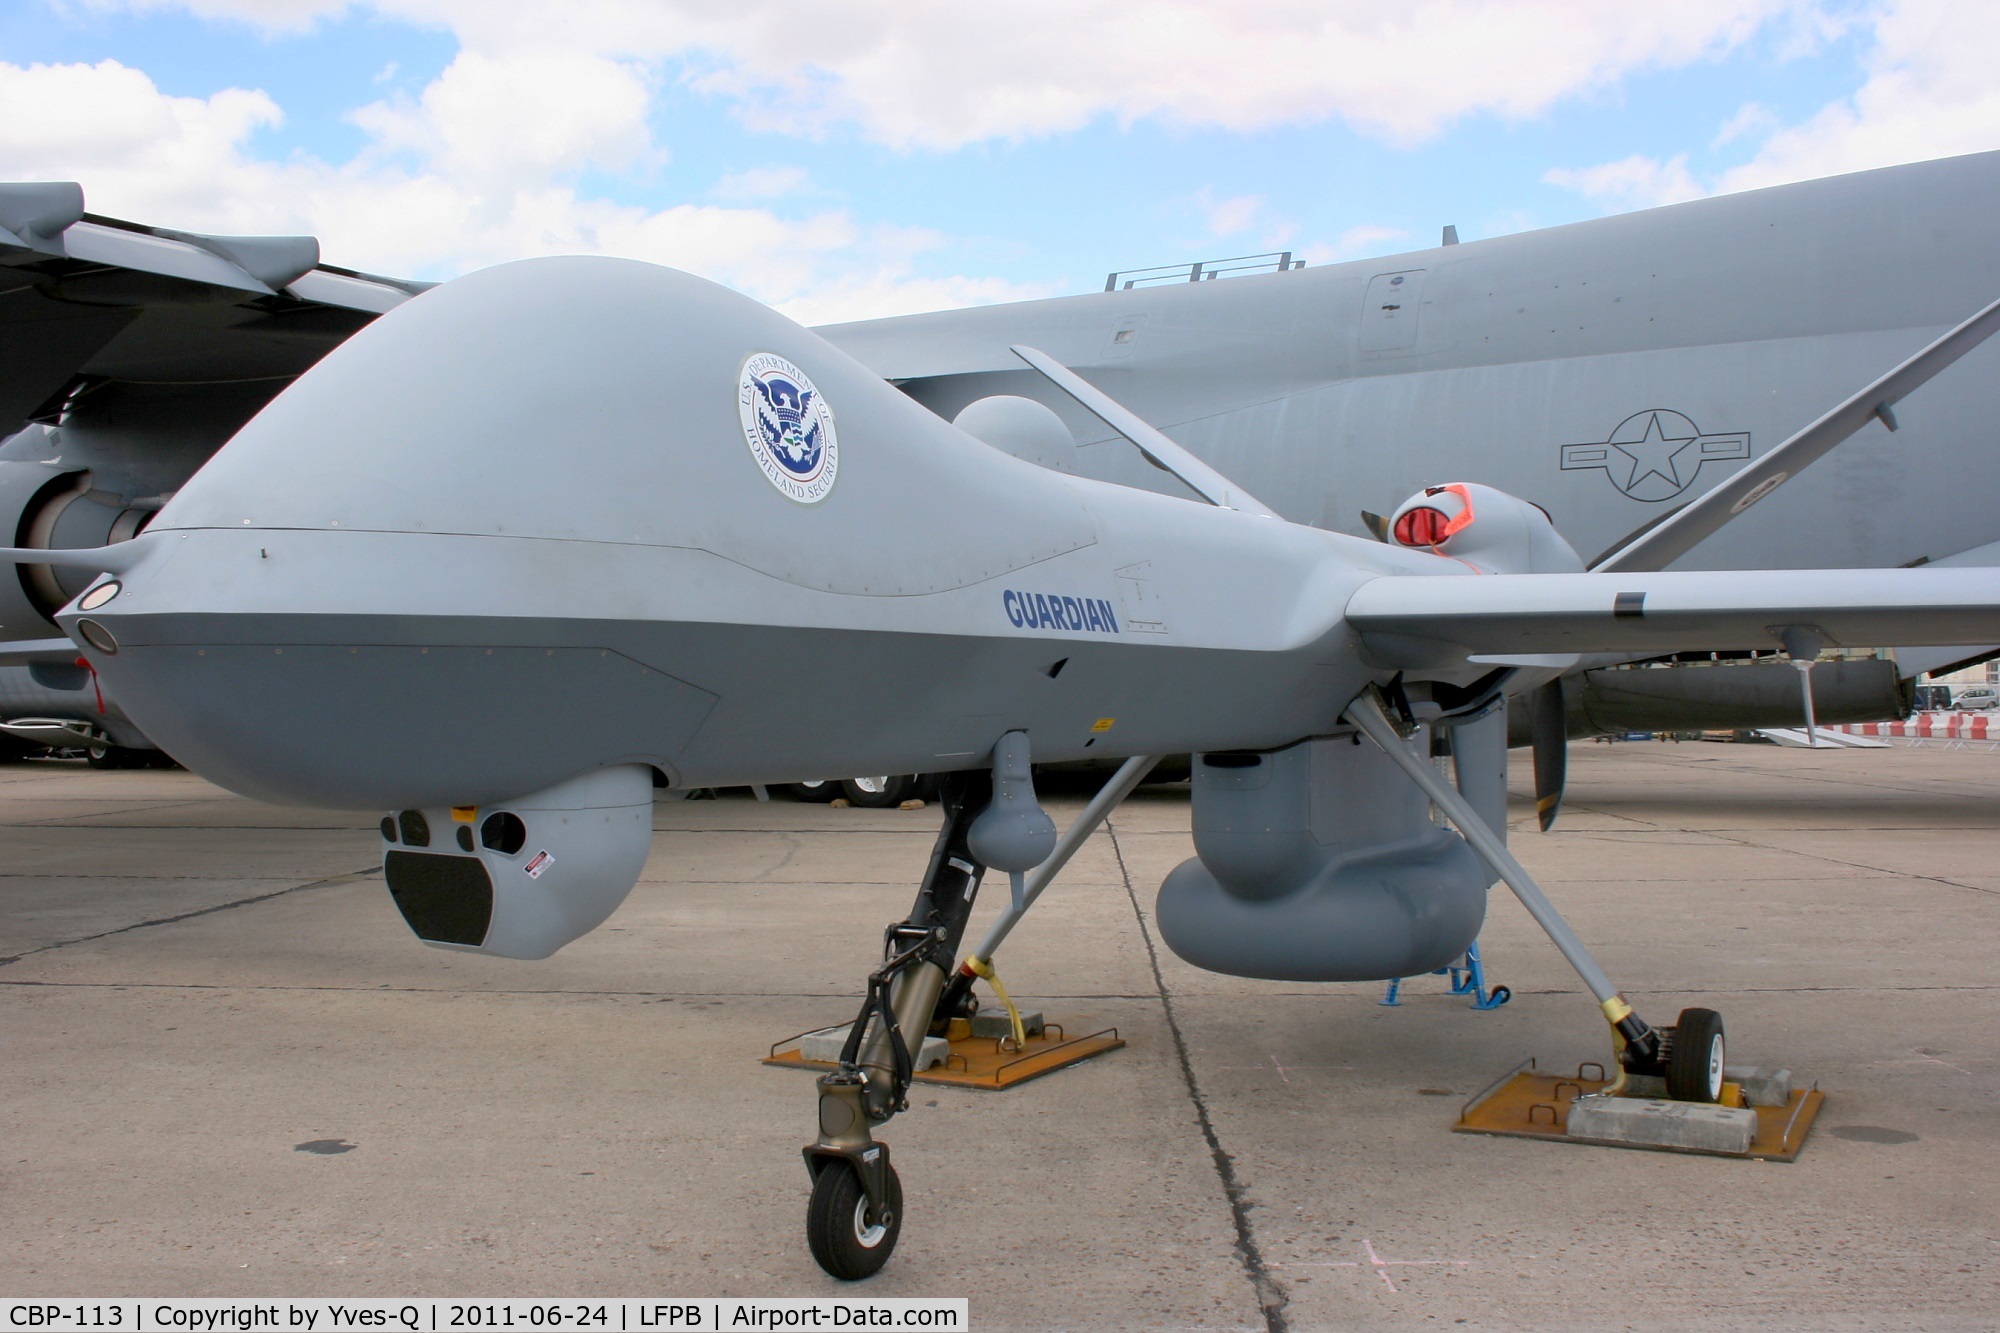 CBP-113, General Atomics MQ-9B Guardian C/N Not found CBP-113, General Atomics Aeronautical System Inc MQ-9B Guardian, US Department of Homeland Security, Displayed at Paris Le Bourget (LFPB-LBG) Air Show in june 2011. this UAV is used for border patrol and drugs smuggling surveillance operations.